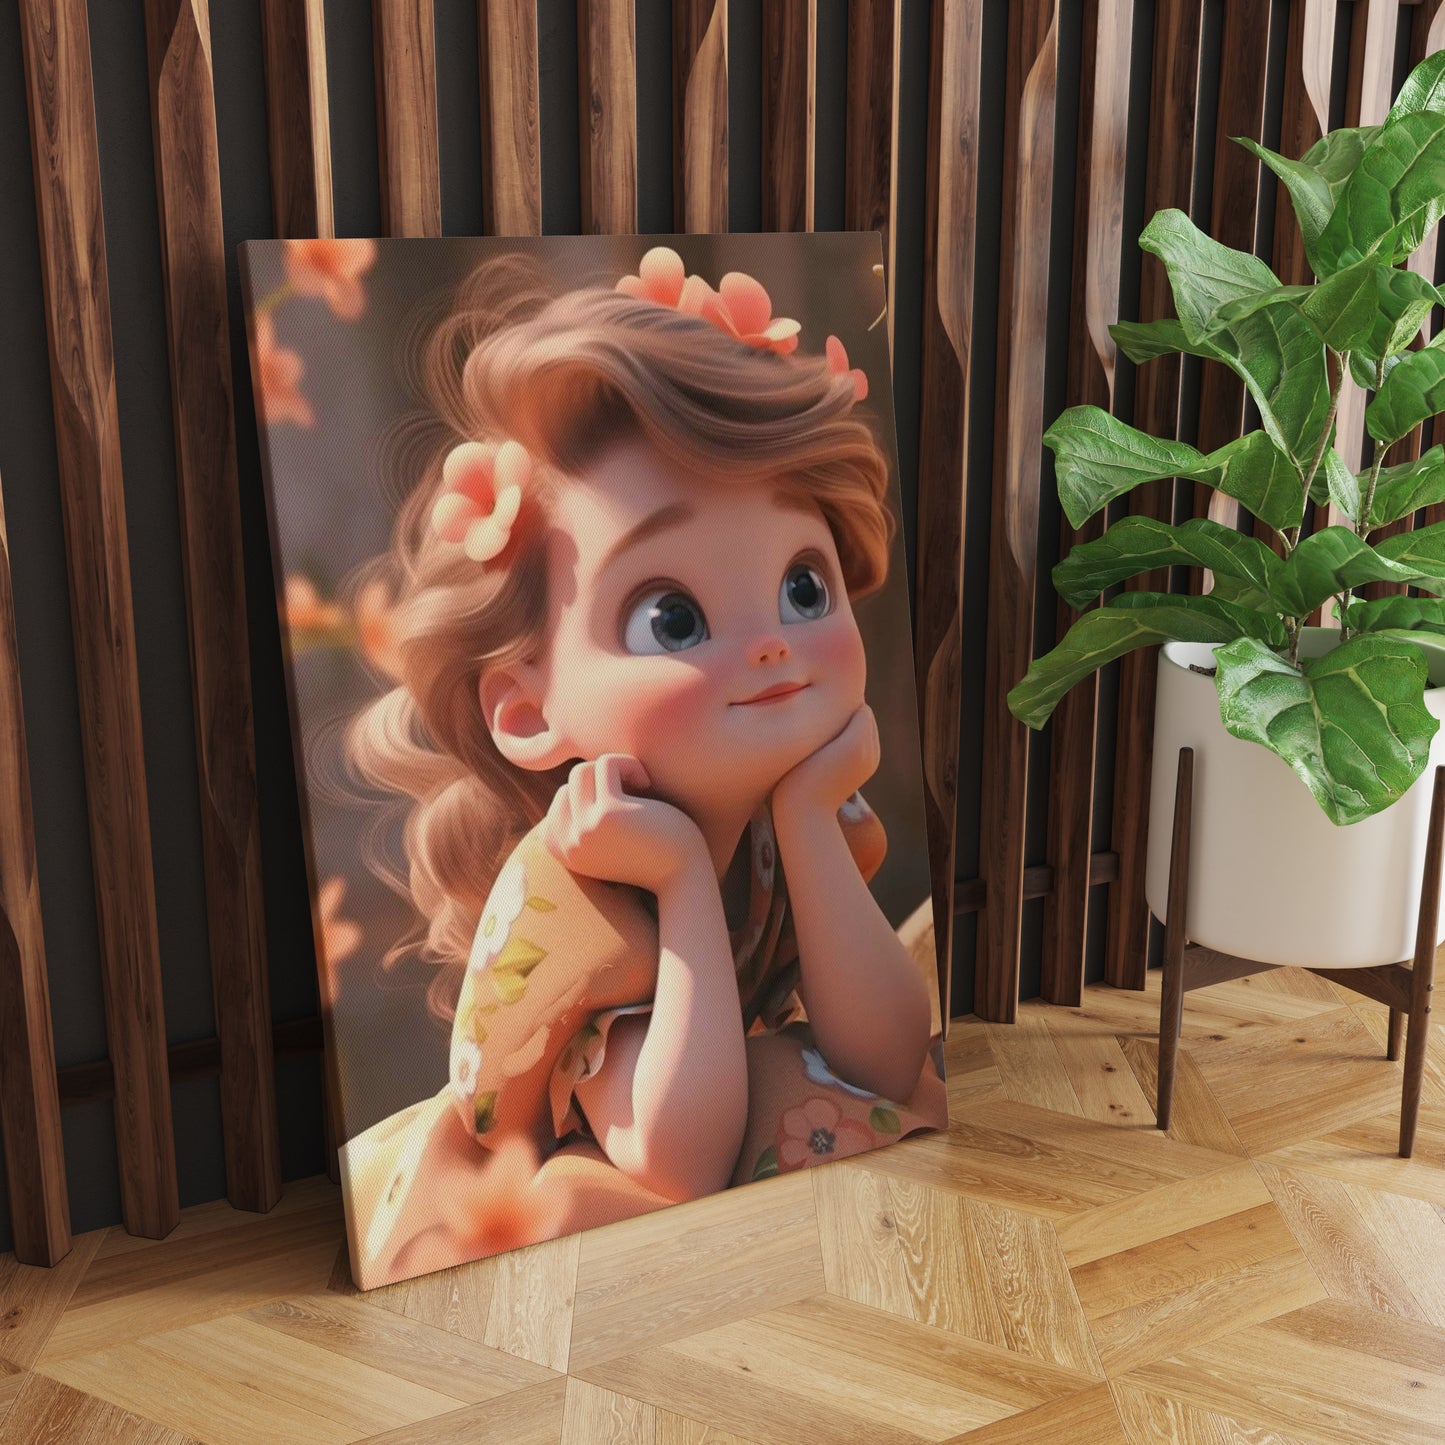 Blossoming Innocence: A Wall Art Celebrating Cute Baby Girls in a Enchanting Floral Backdrop - Embrace the Delicate Beauty of Youth and Nature's Splendor - S05E70